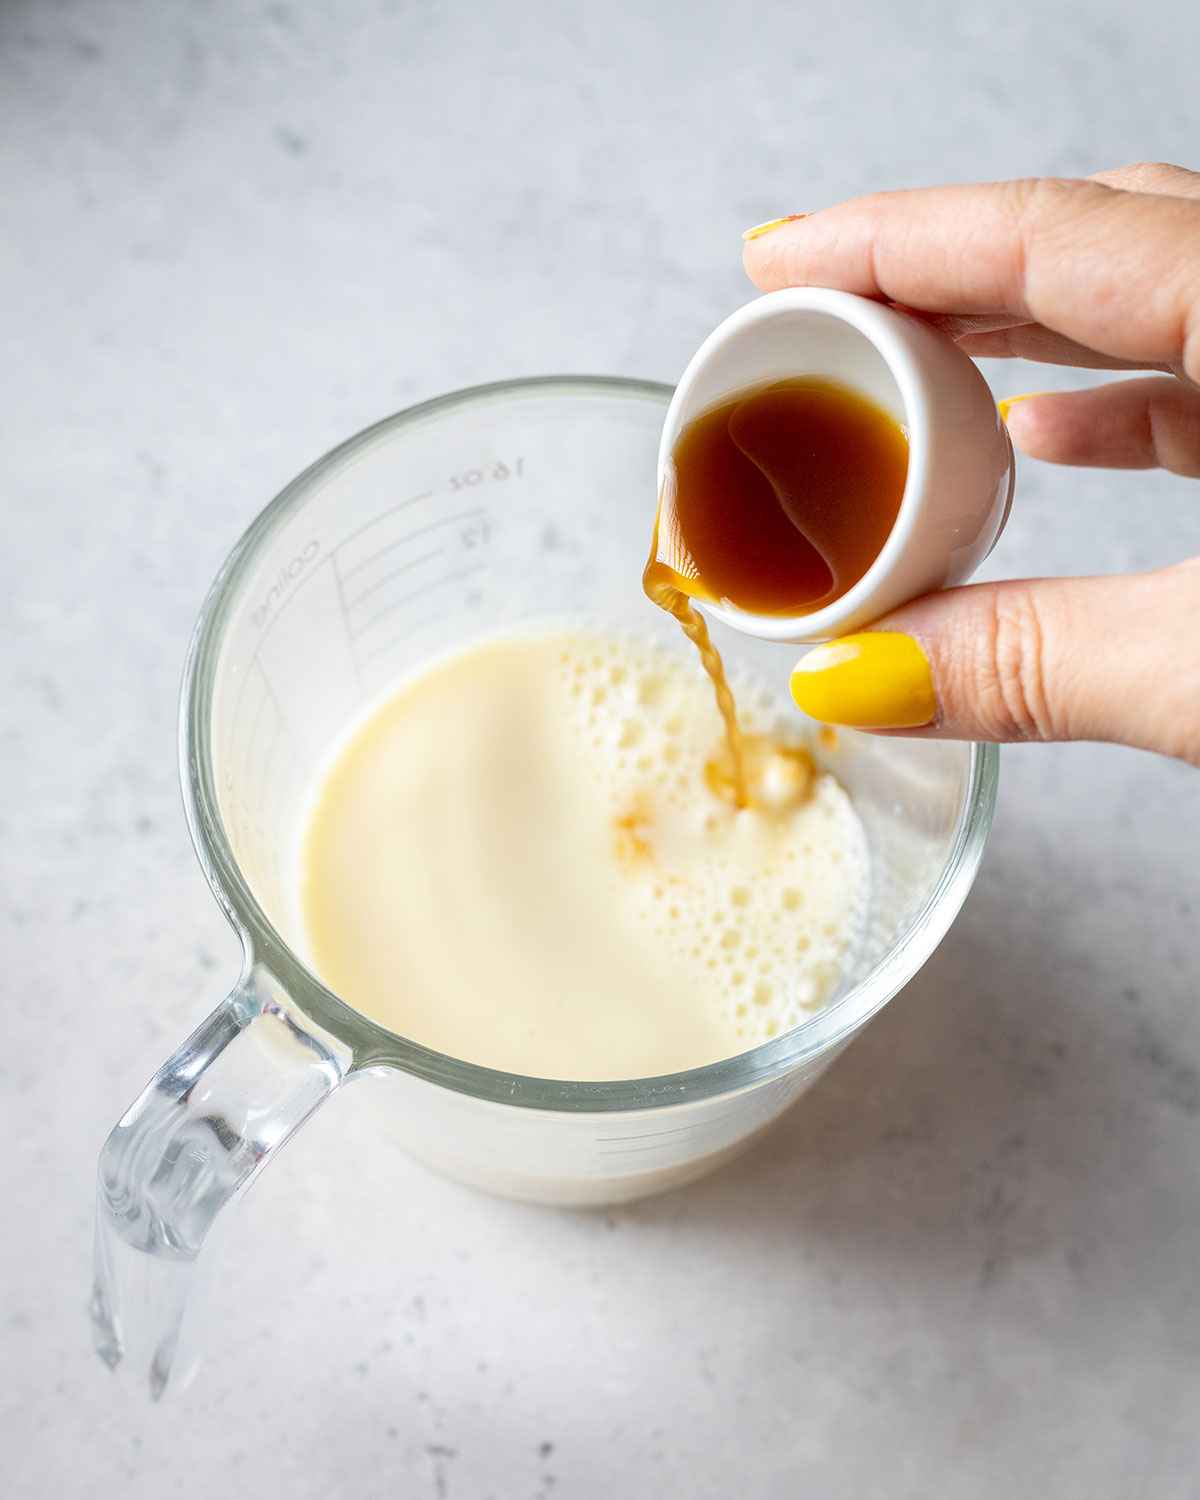 vanilla extract being added to a jug of milk